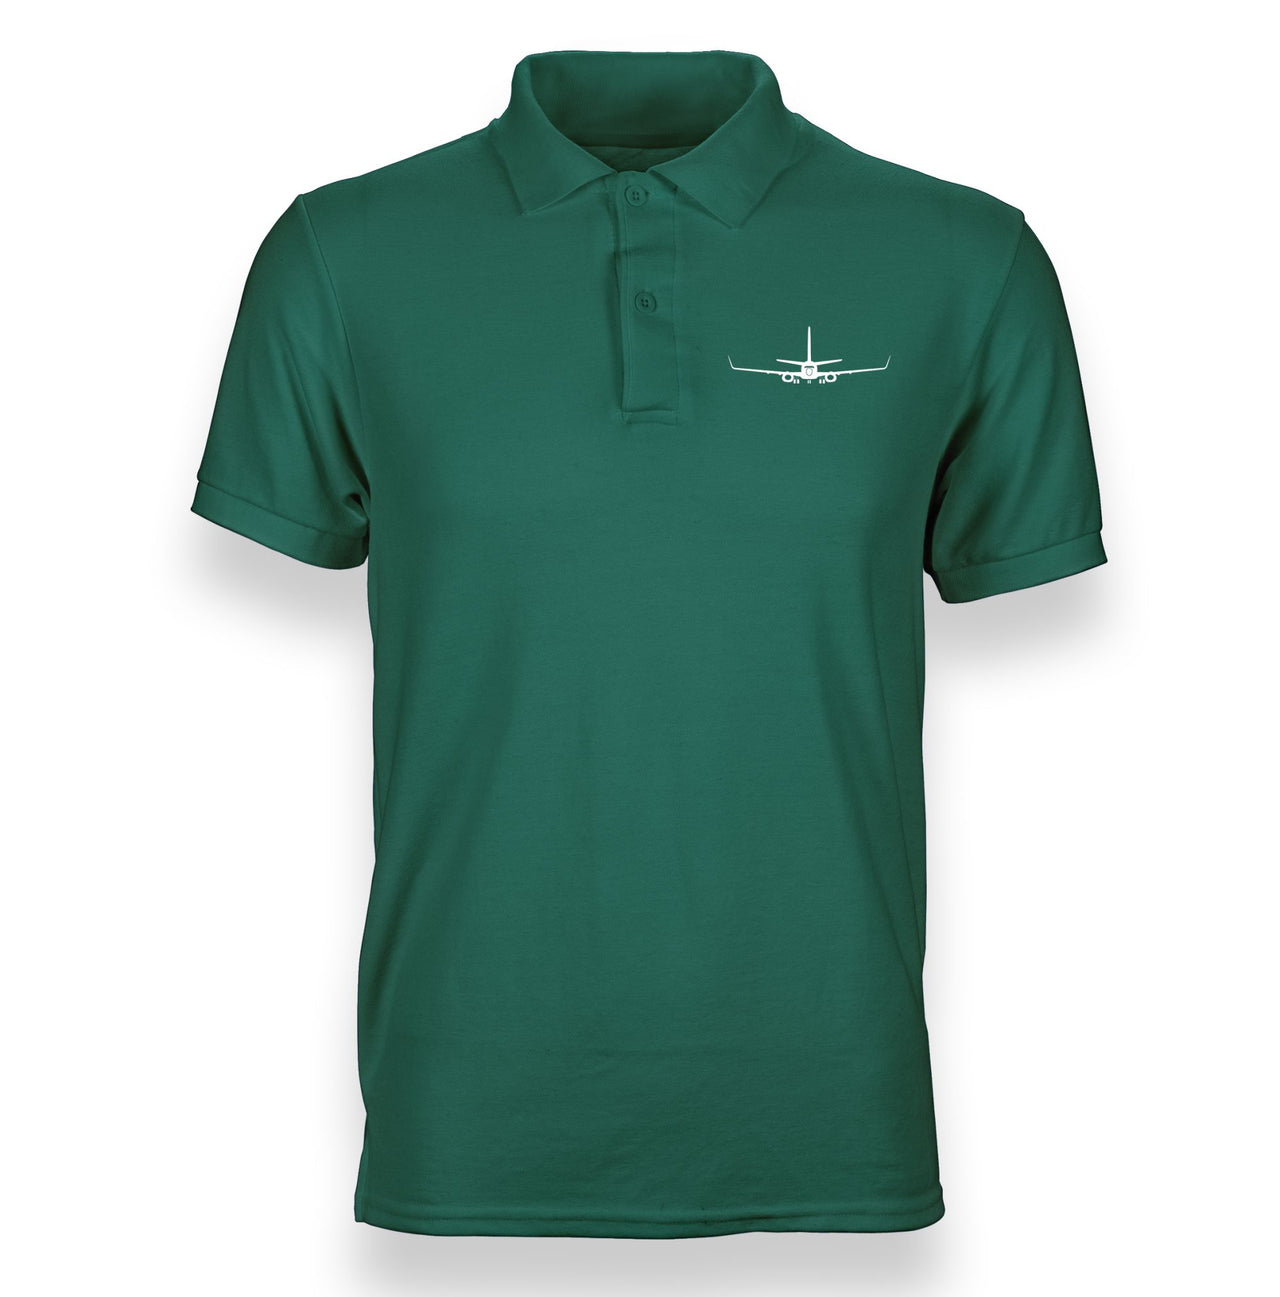 Boeing 737-800NG Silhouette Designed "WOMEN" Polo T-Shirts